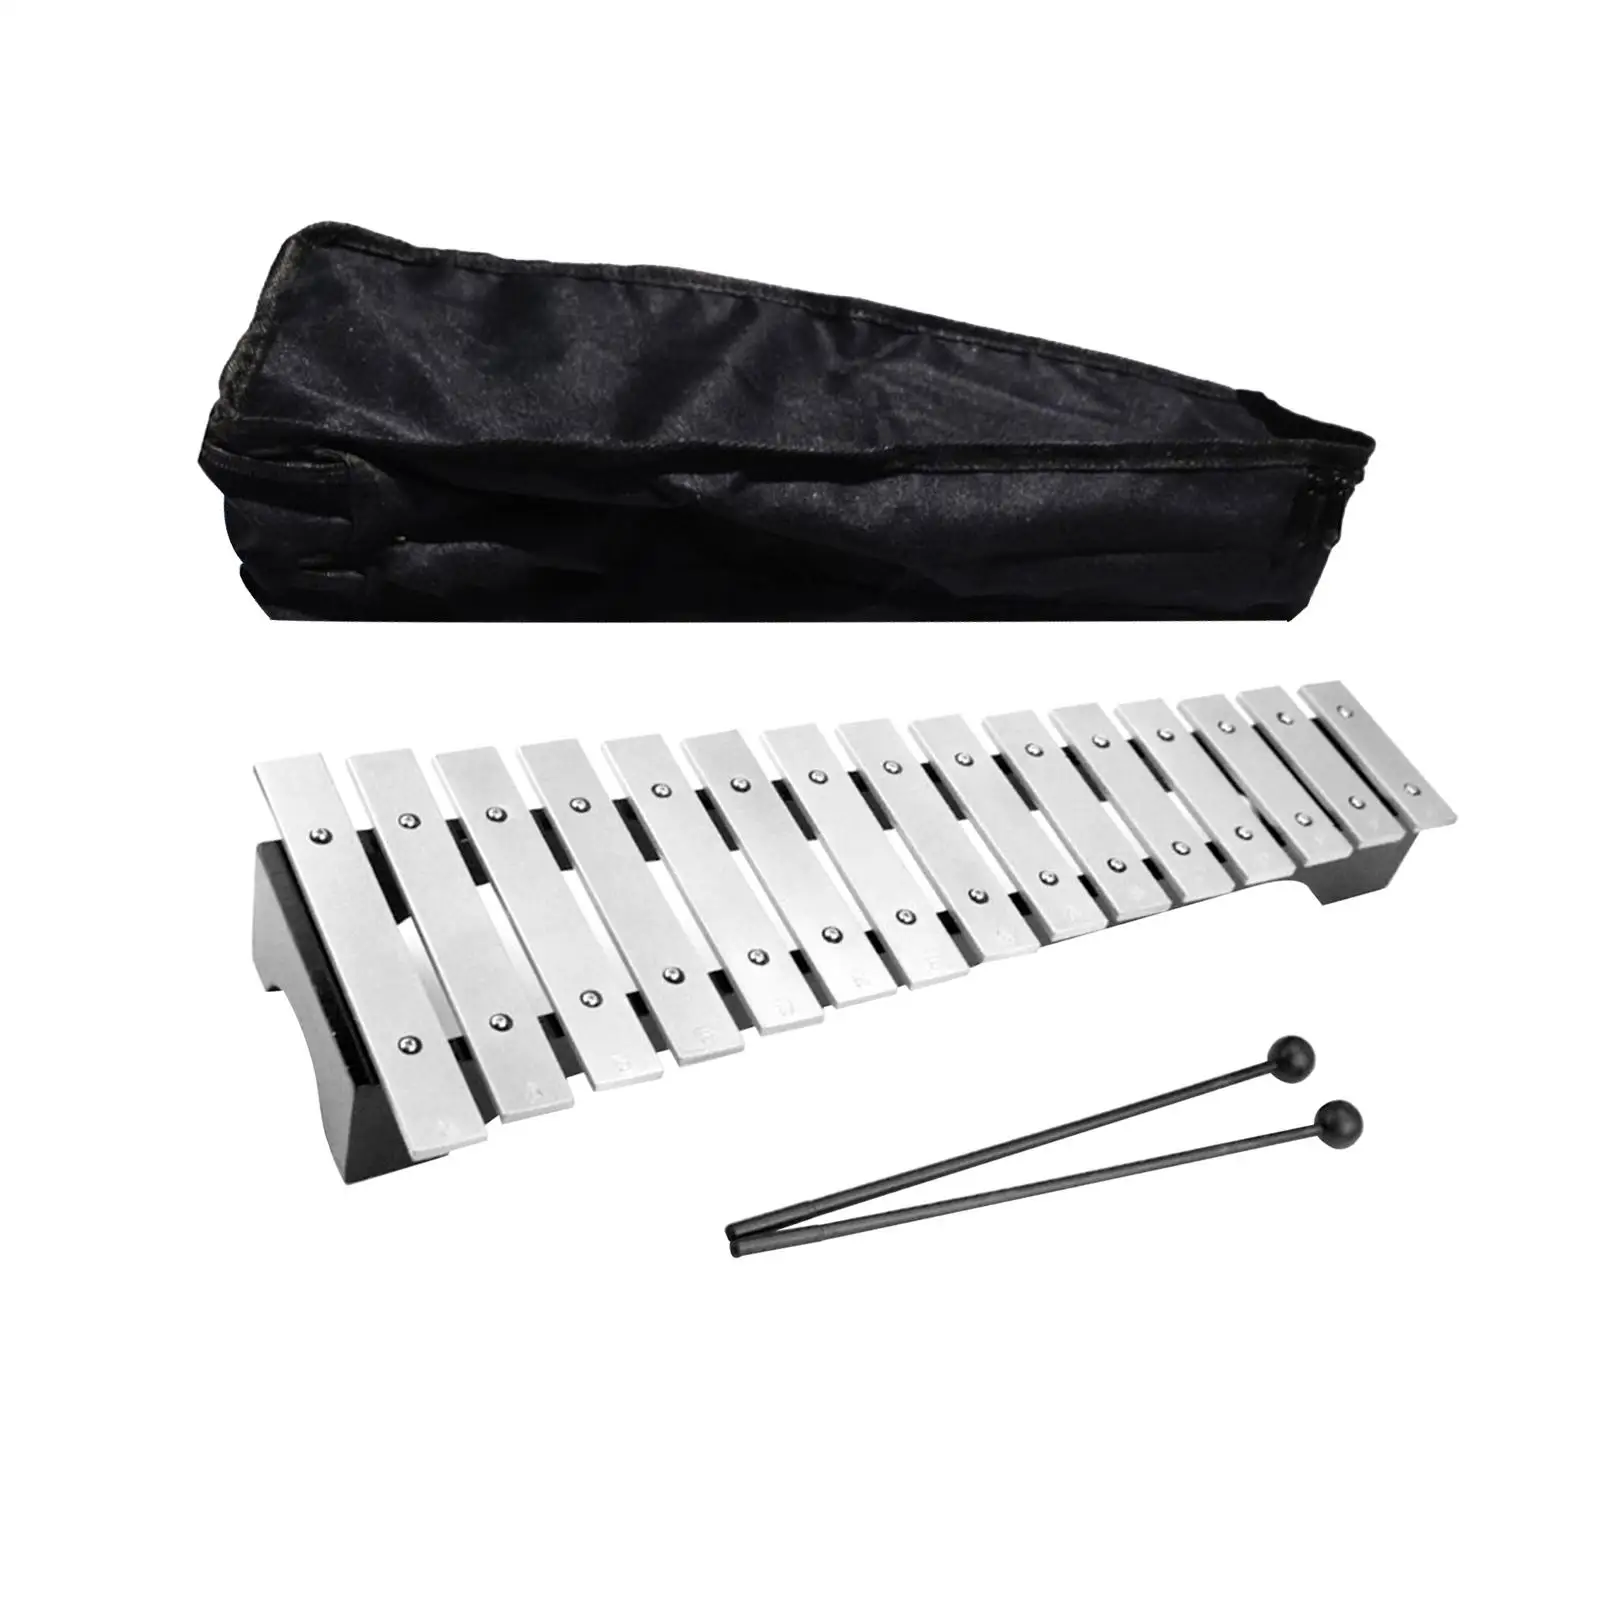 15 Note Metal Xylophone Glockenspiel Xylophone for Kids and Adult Stage Band